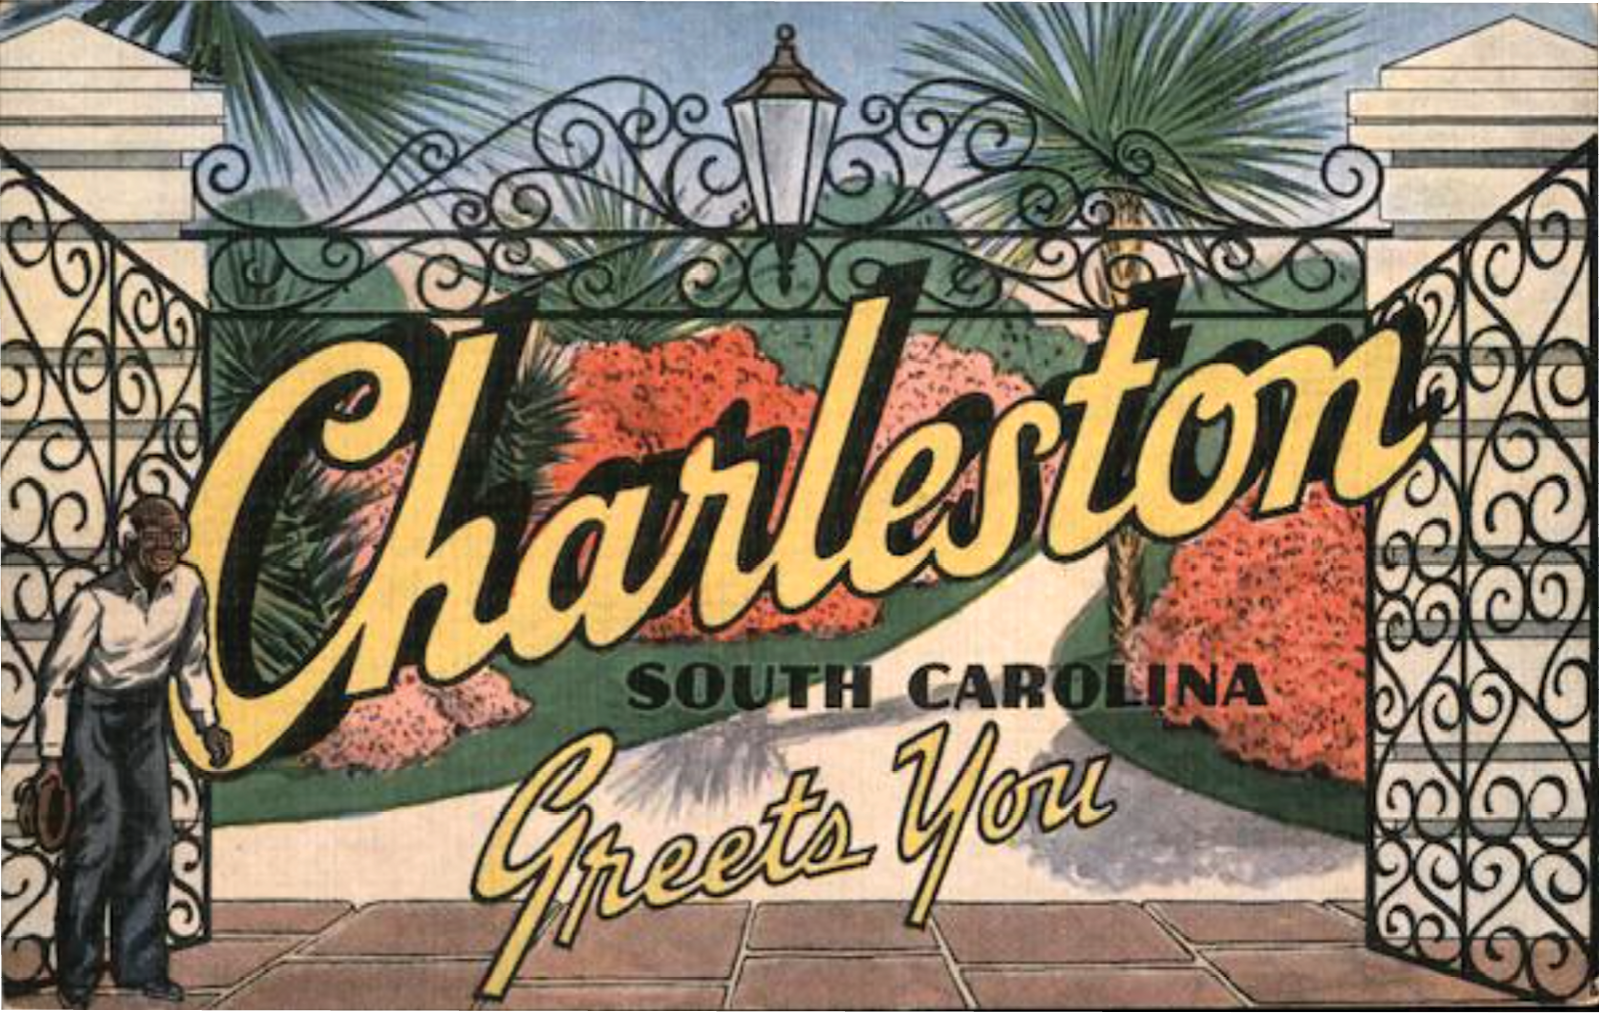 Charleston Greets You: This illustrated card promoted the city’s architecture, gardens, and especially “the delicate wrought iron gateways, with their beautiful and intricate designs,” noting “the ironsmiths who made them developed their art to perfection. Much of the work was hand-hammered by slave labor.”